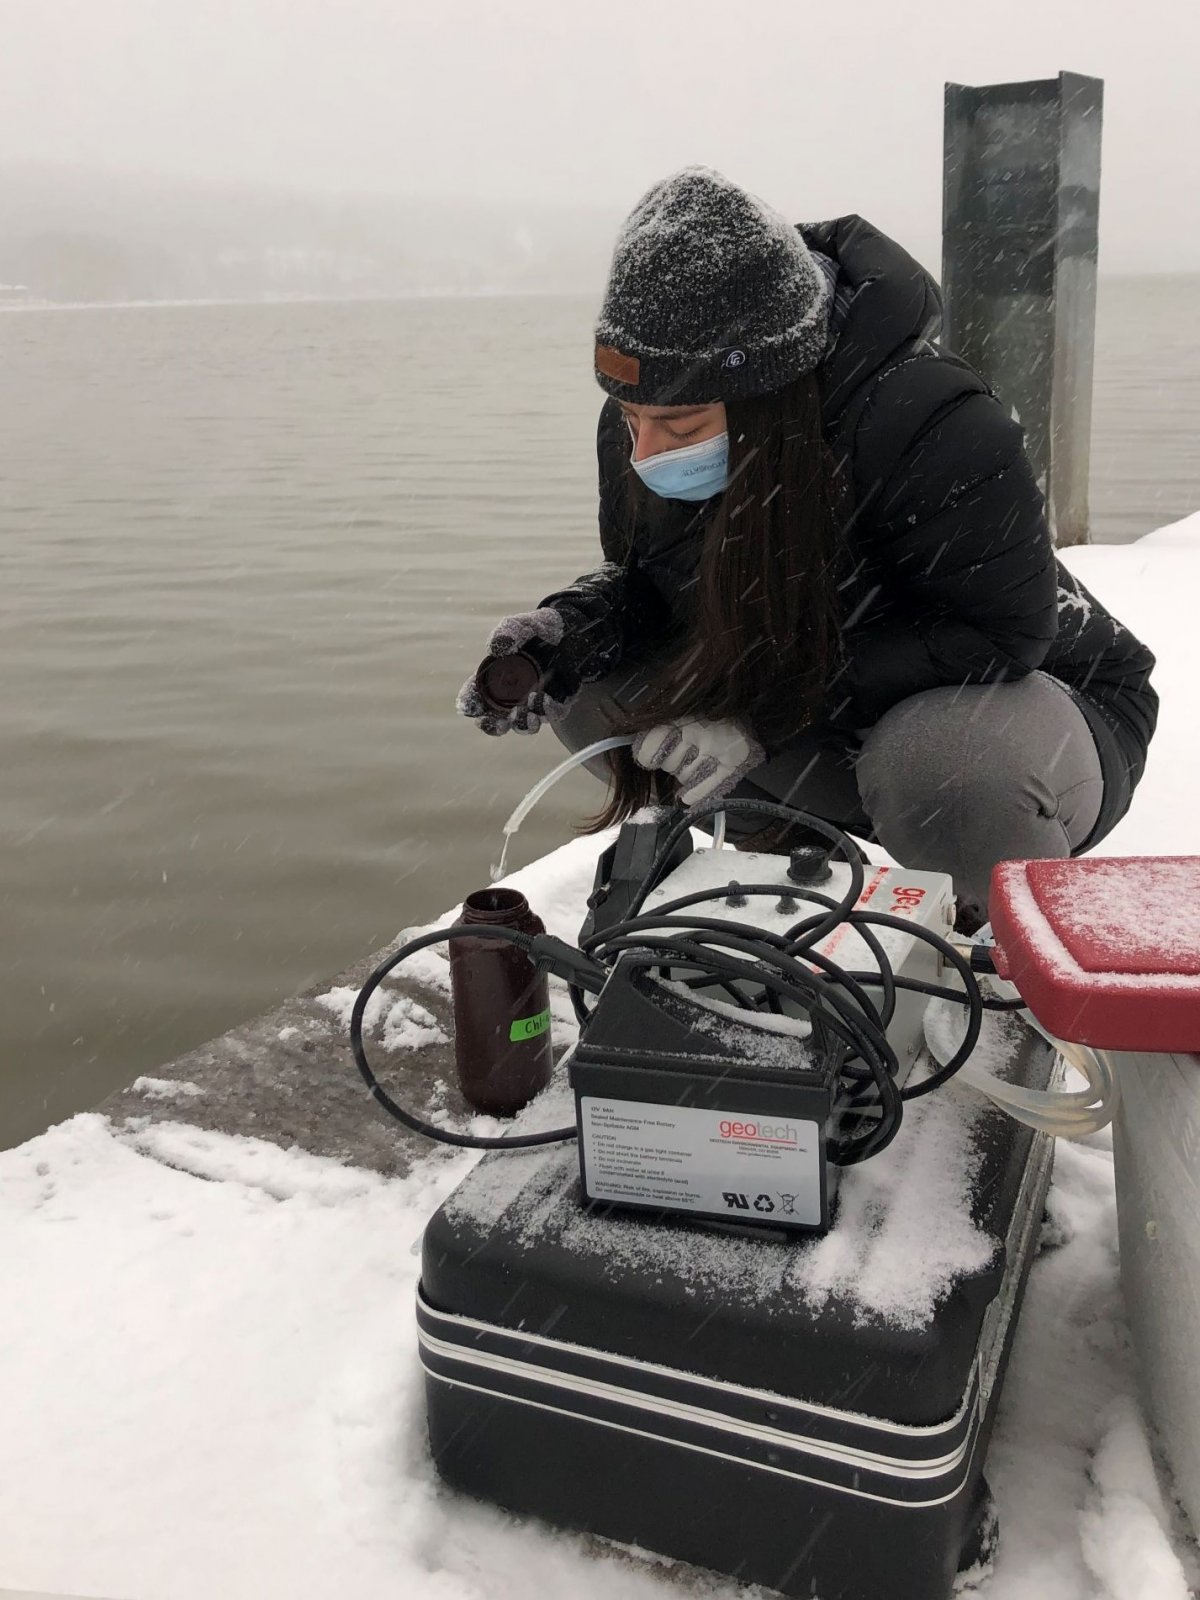 Vanessa Cubillos Tellez collecting water samples.